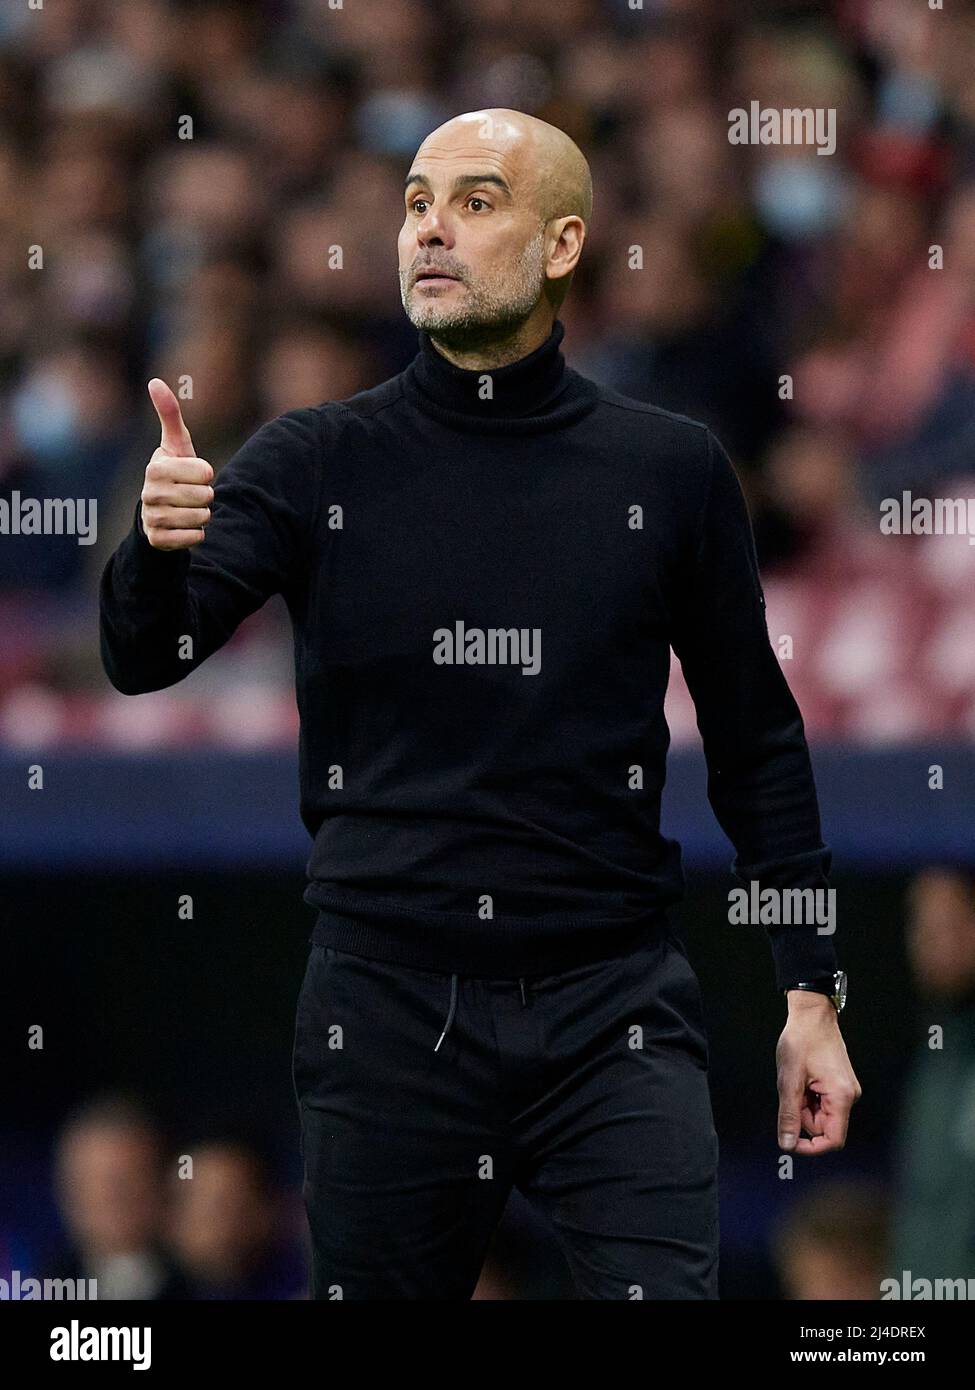 Manchester City head coach Pep Guardiola    during the UEFA Champions League match, Quarter Final, Second Leg, between Atletico de Madrid and Manchester City played at Wanda Metropolitano Stadium on April 13, 2022 in Madrid, Spain. (Photo by Ruben Albarran / PRESSINPHOTO) Stock Photo